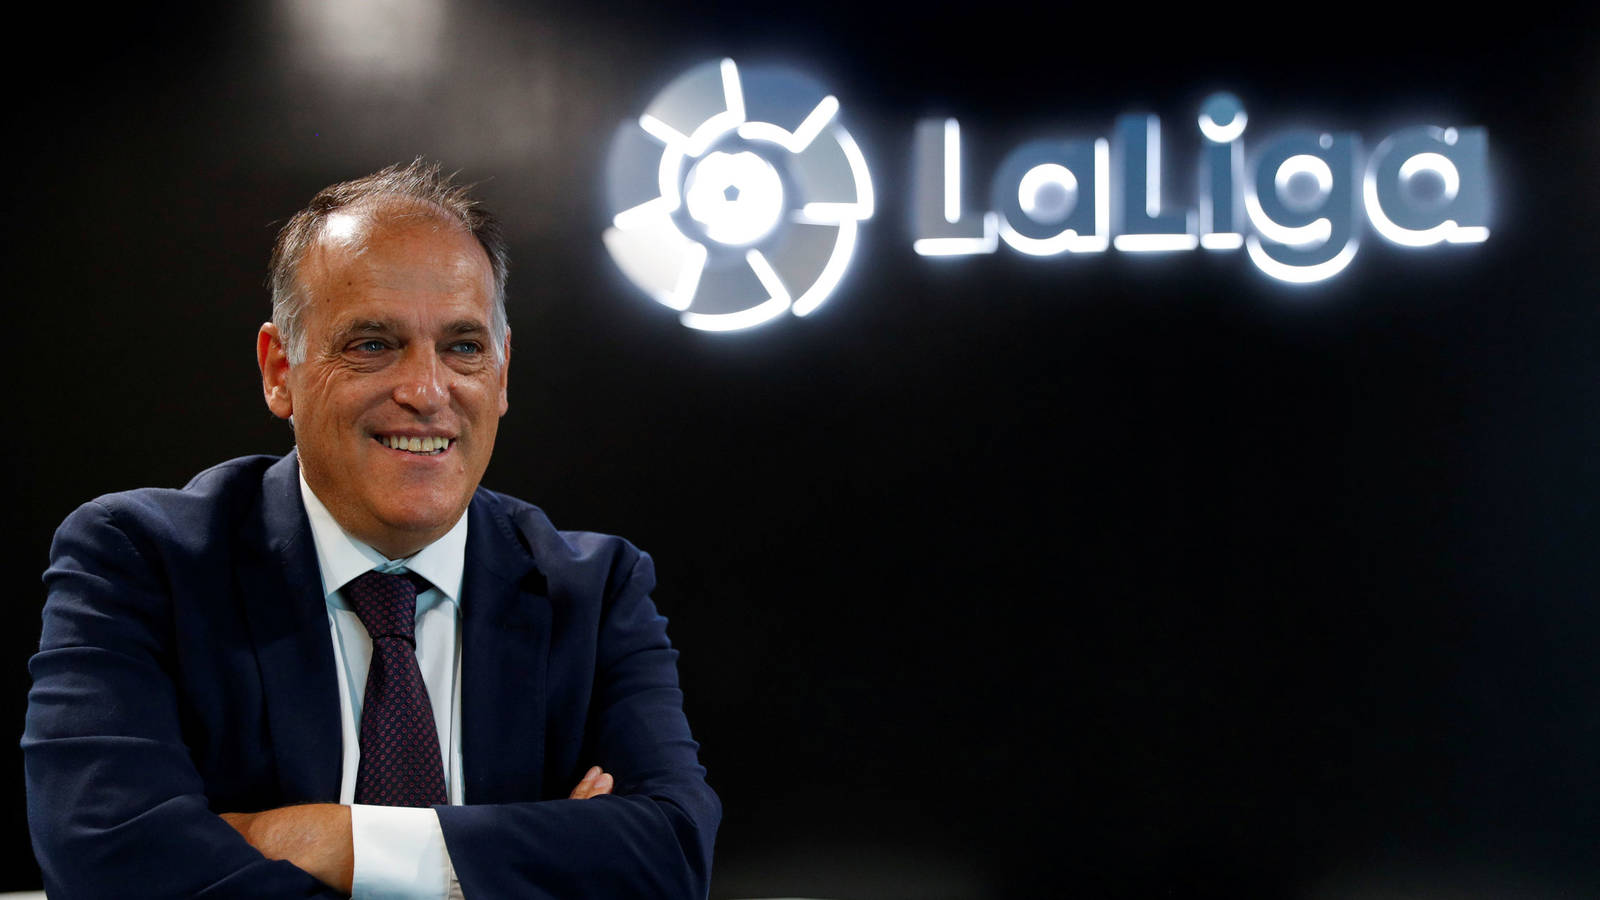 LaLiga to consider legal action against FIFA